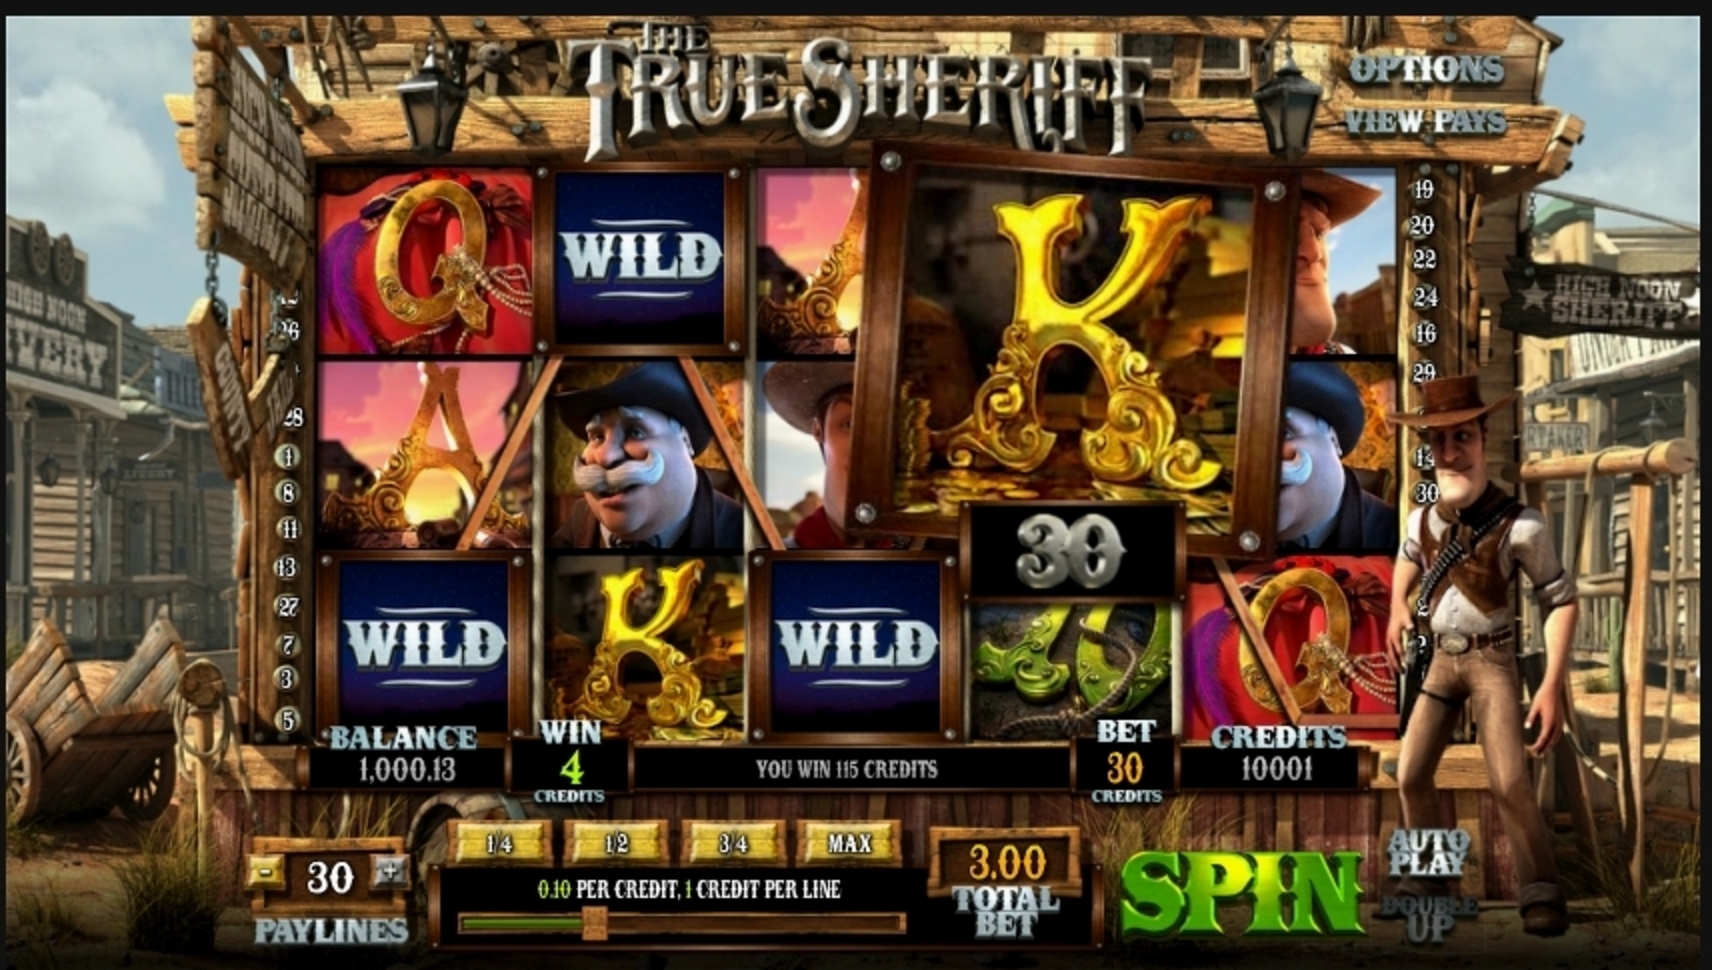 Win Money in True Sheriff Free Slot Game by Betsoft